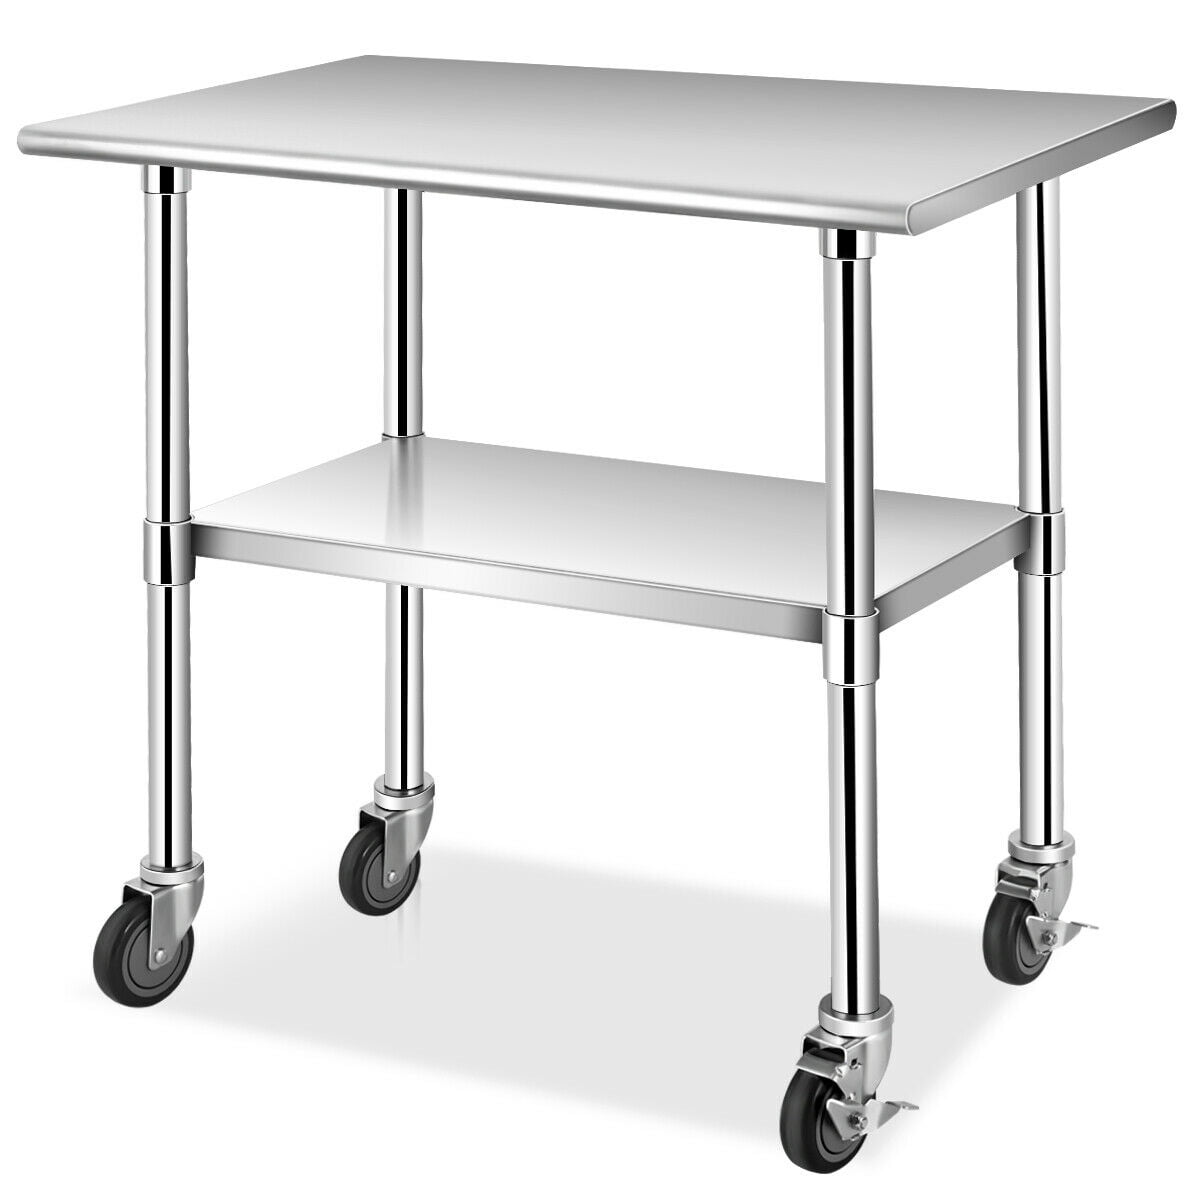 NSF Stainless Steel Commercial Kitchen Prep & Work Table - Walmart.com ...